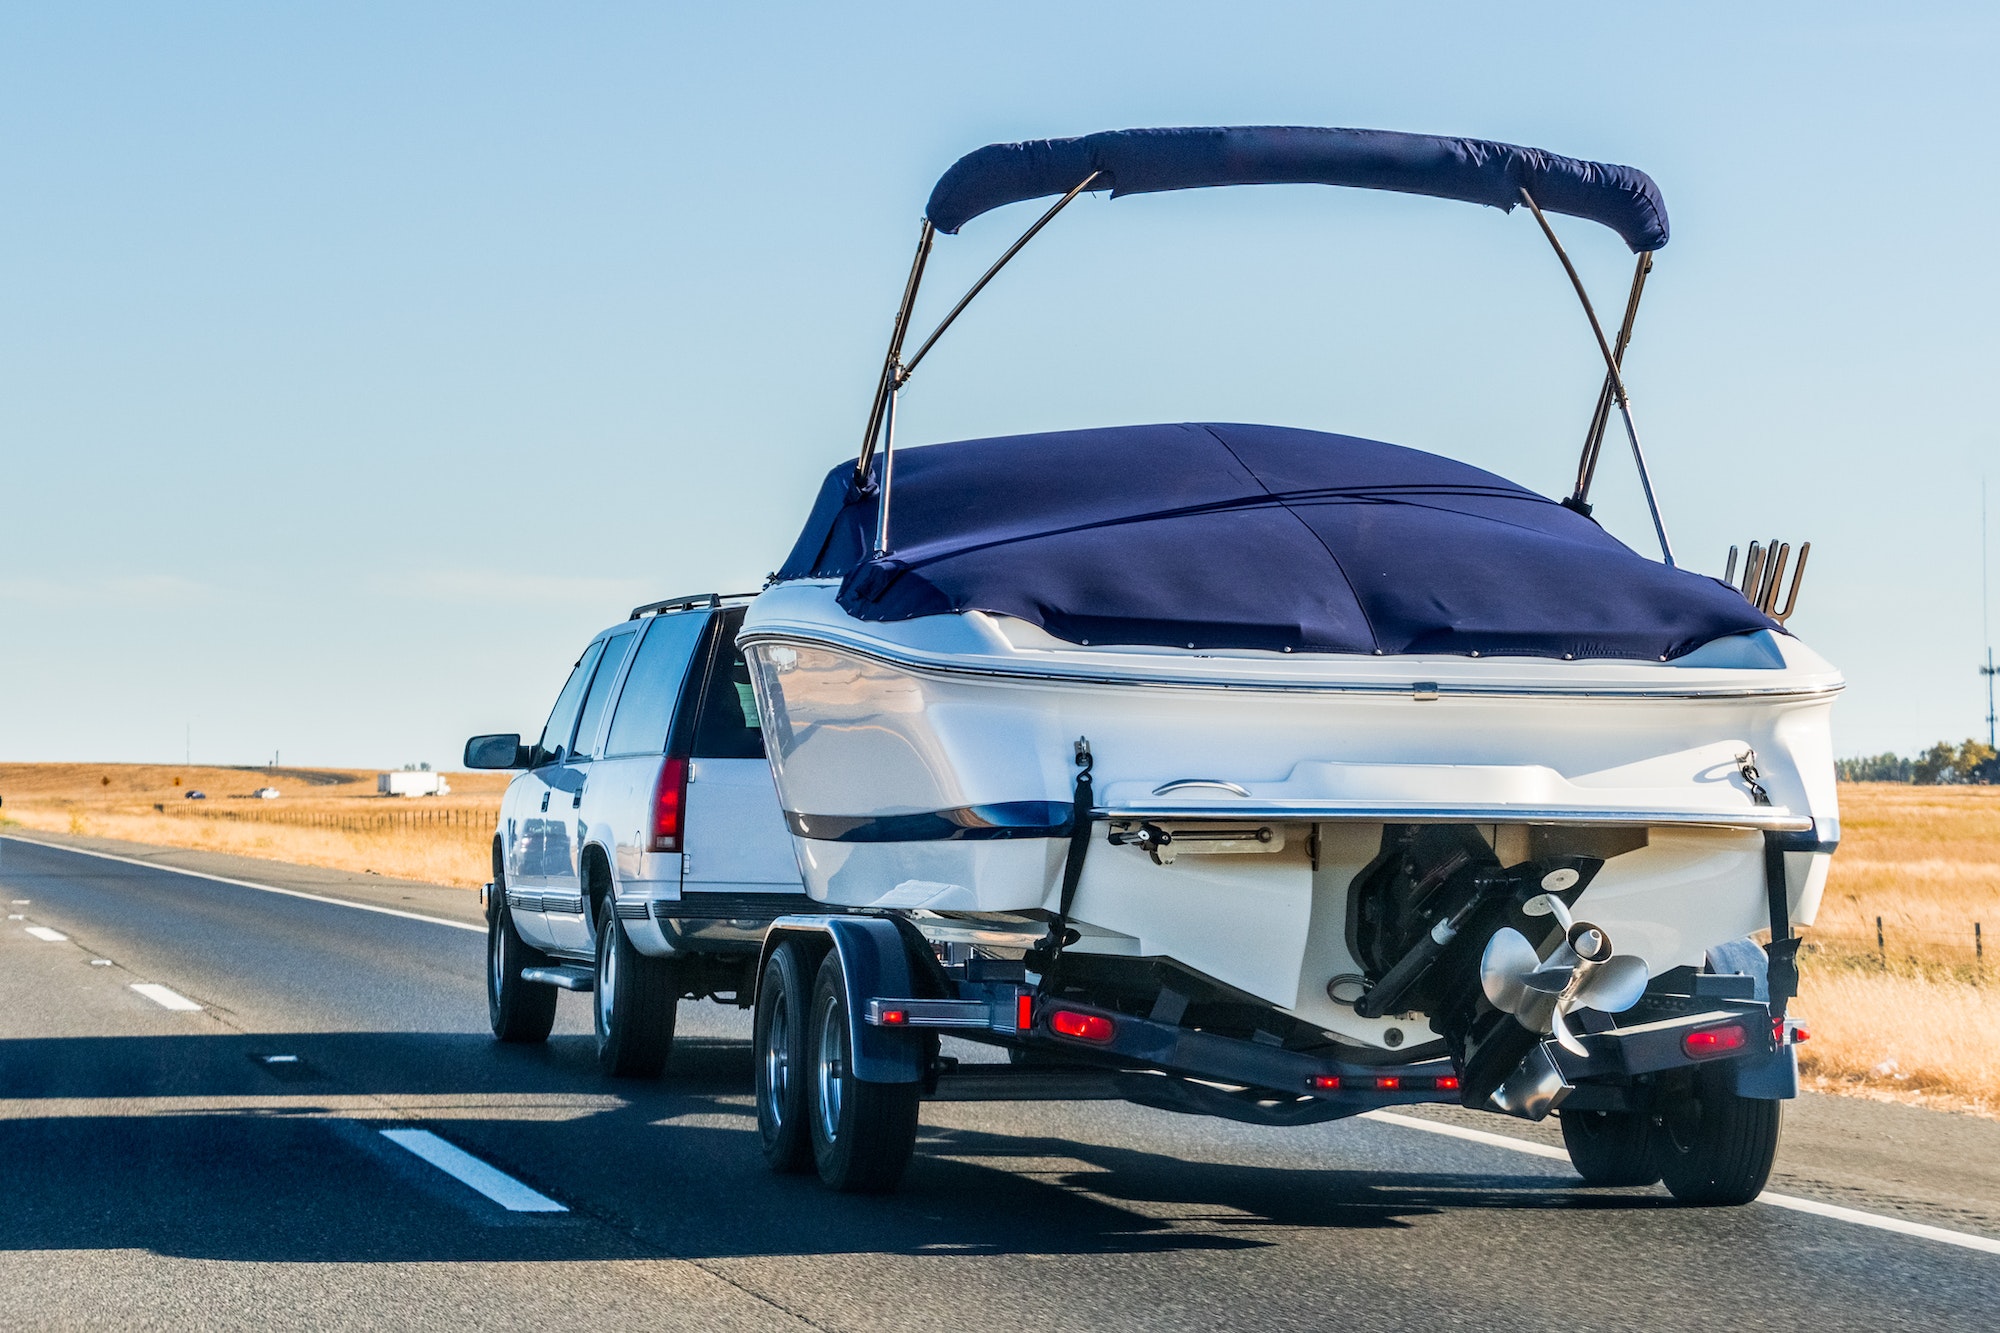 Truck towing a boat on the interstate, California